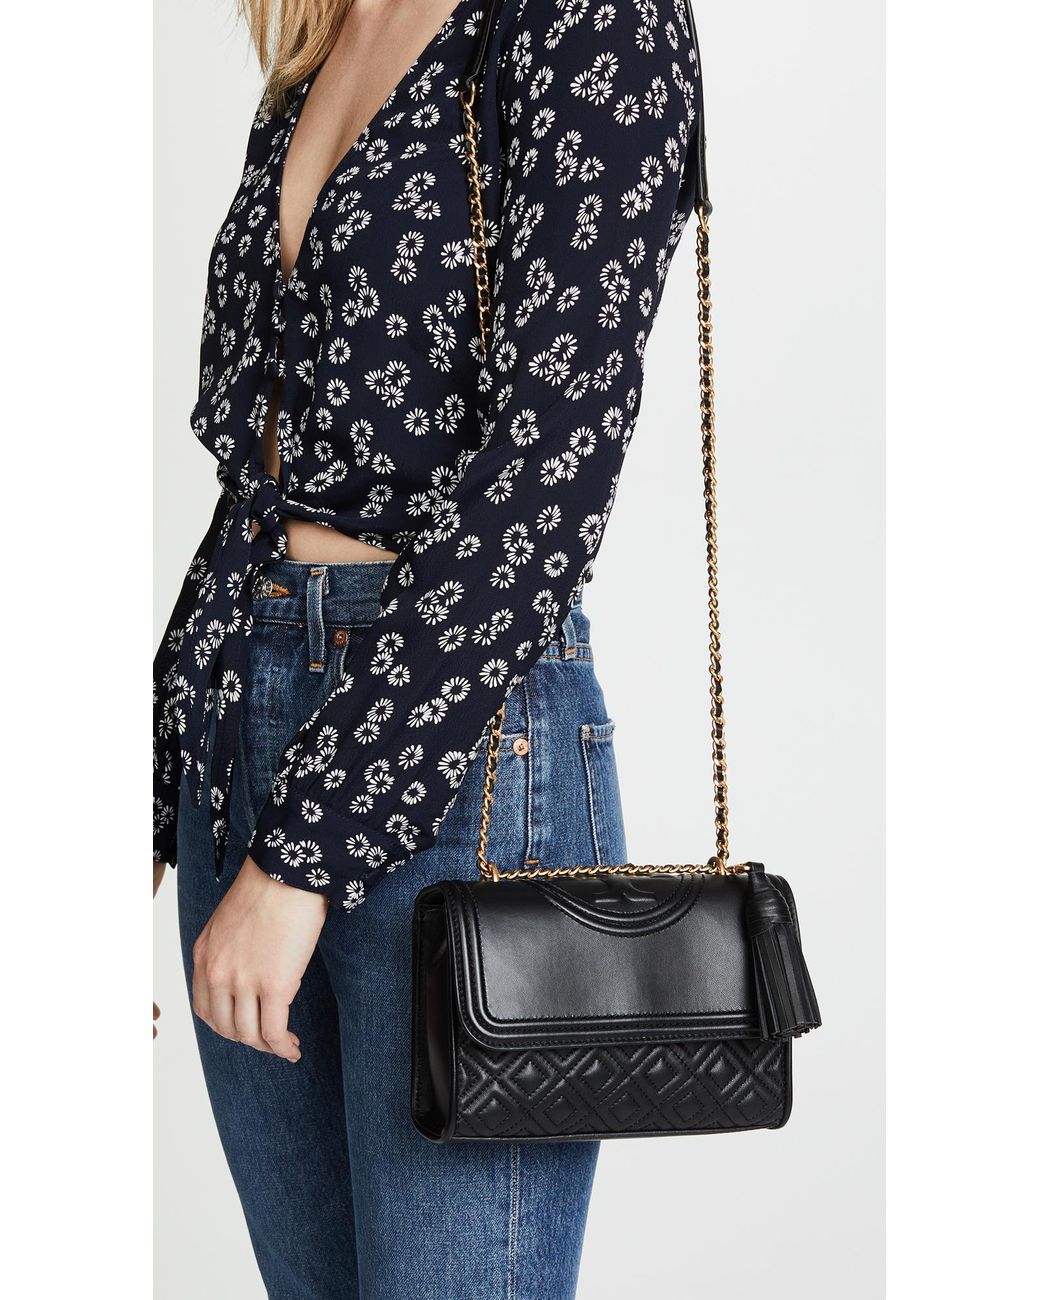 Tory Burch Fleming Small Convertible Shoulder Bag in Black | Lyst Canada